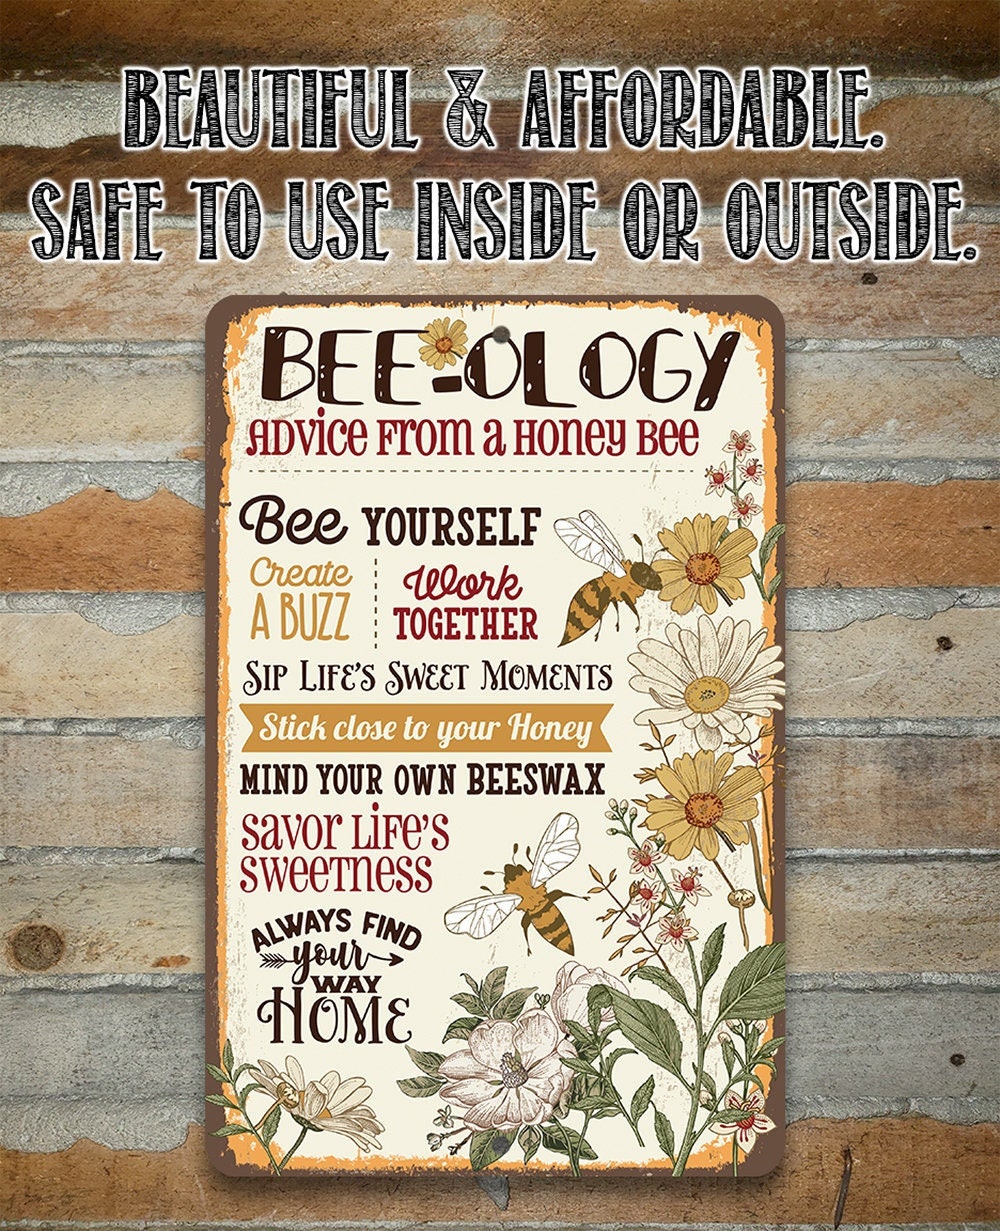 BEE-ology, Advice From a Honey Bee - Metal Sign Lone Star Art 